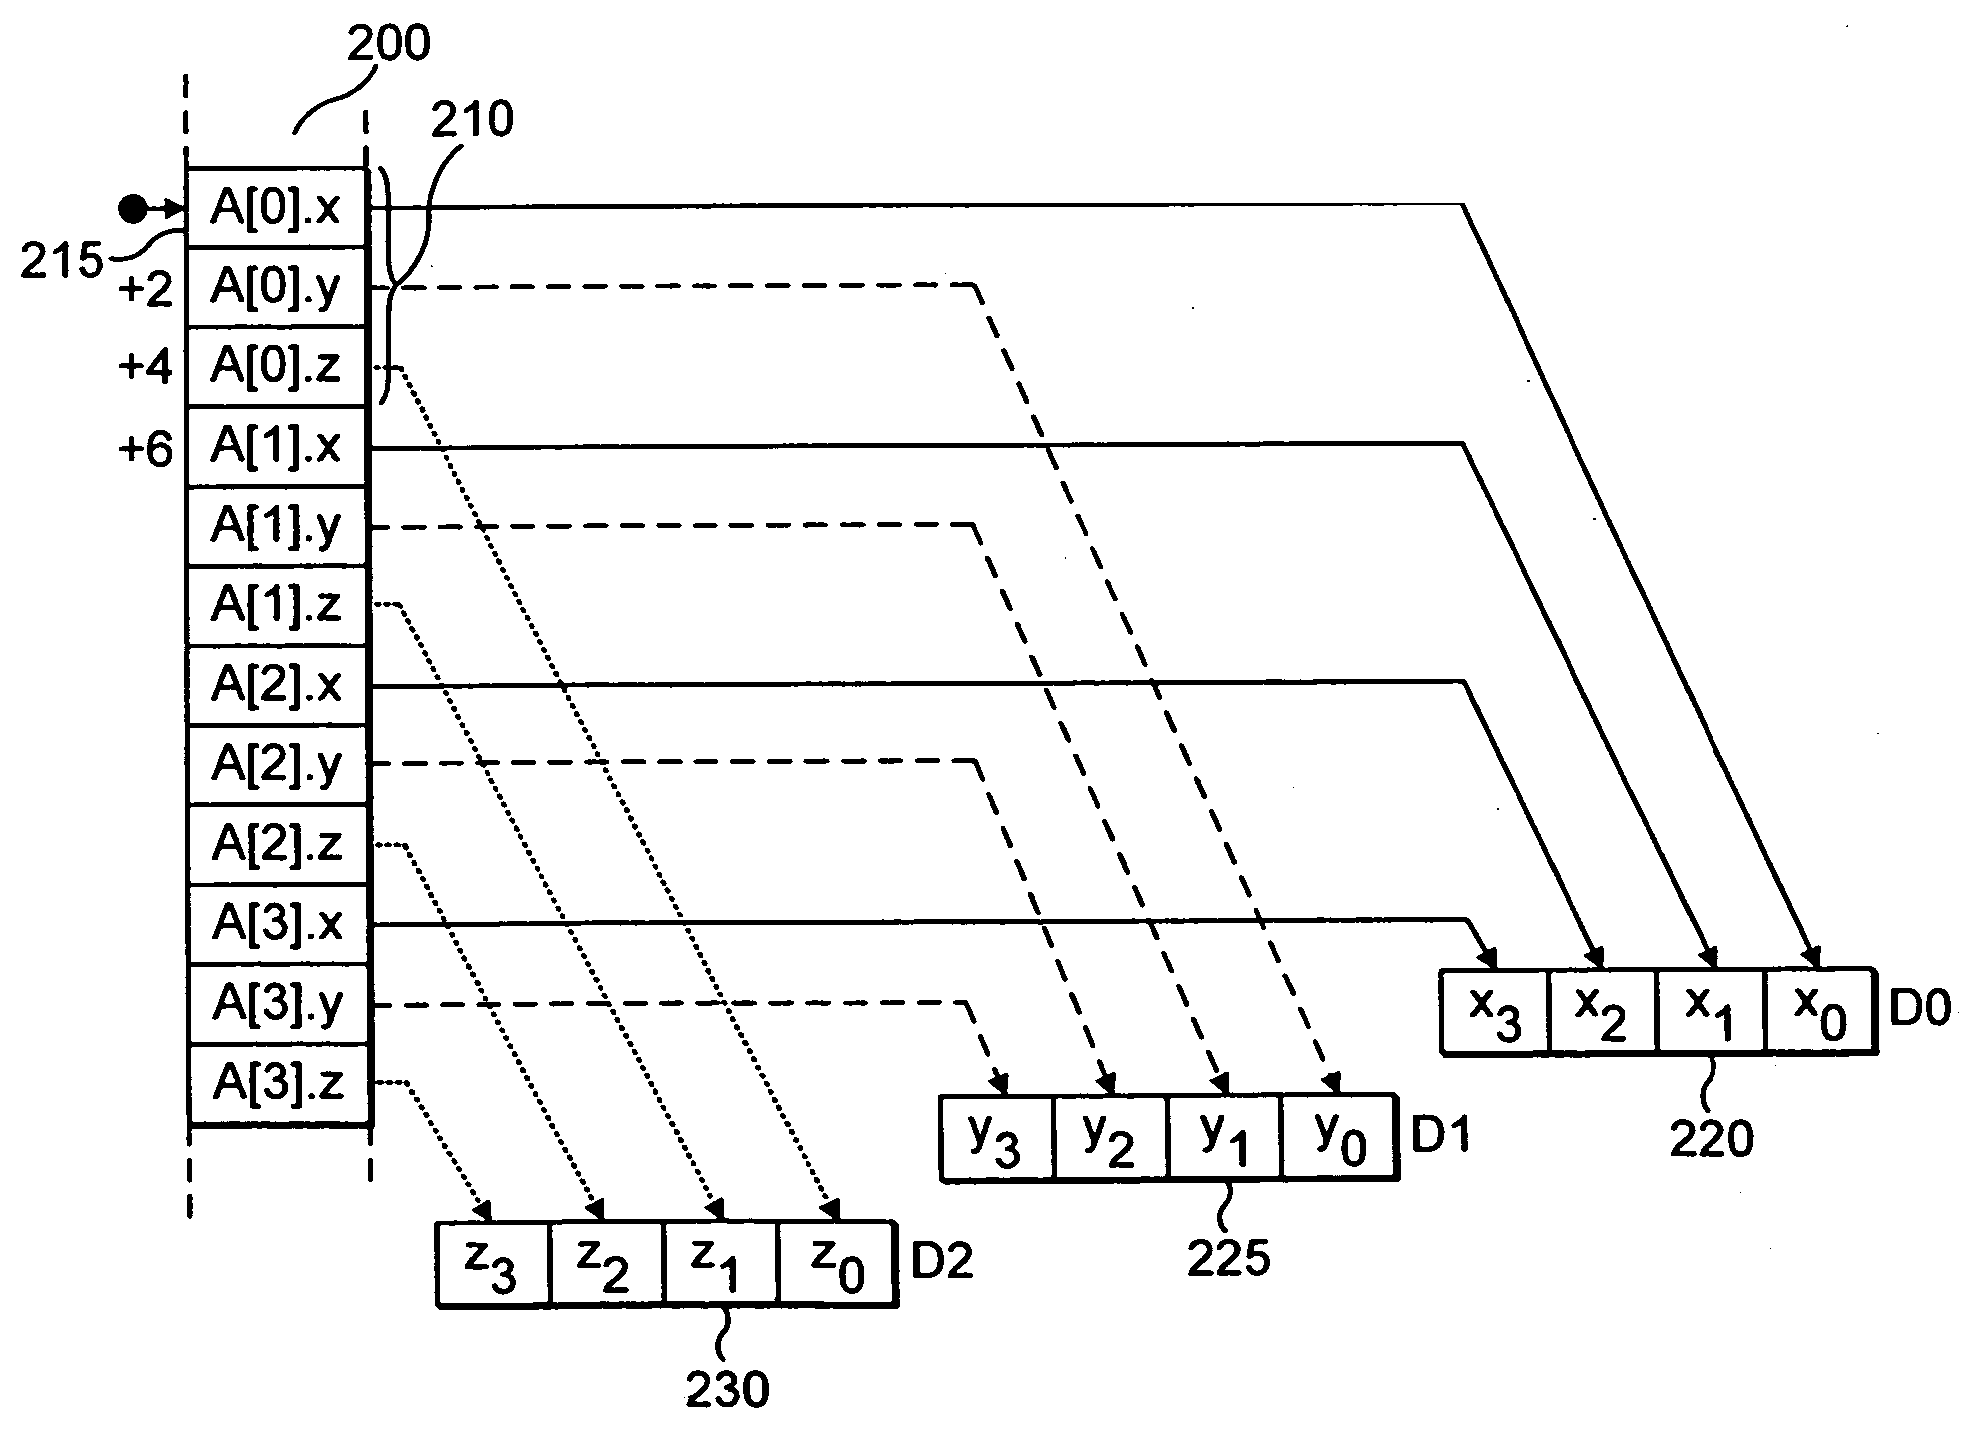 Table lookup operation within a data processing system